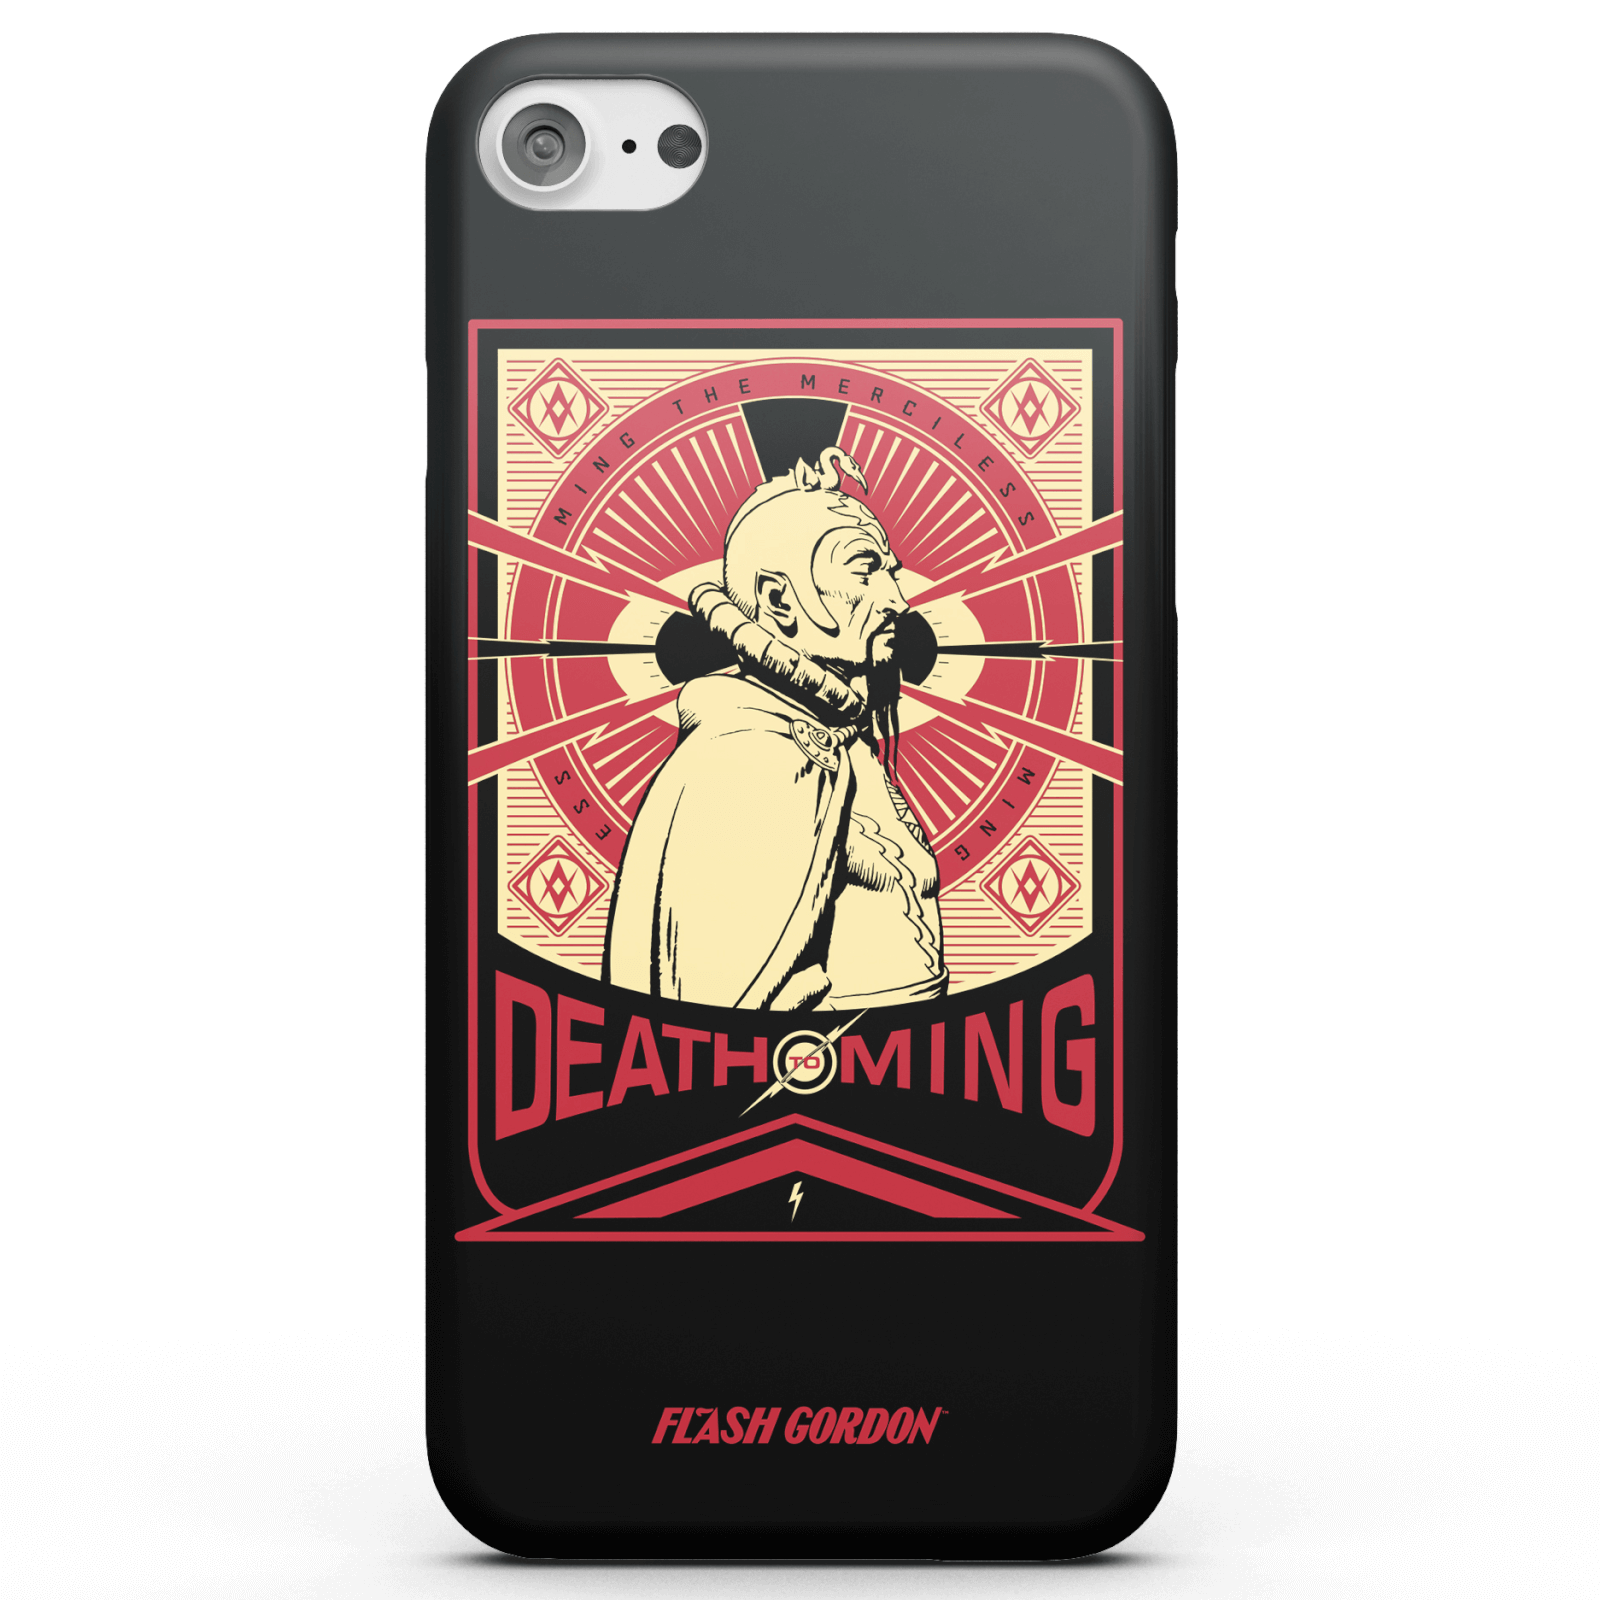 Flash Gordon Death To Ming Phone Case for iPhone and Android - iPhone 6 Plus - Snap Case - Matte